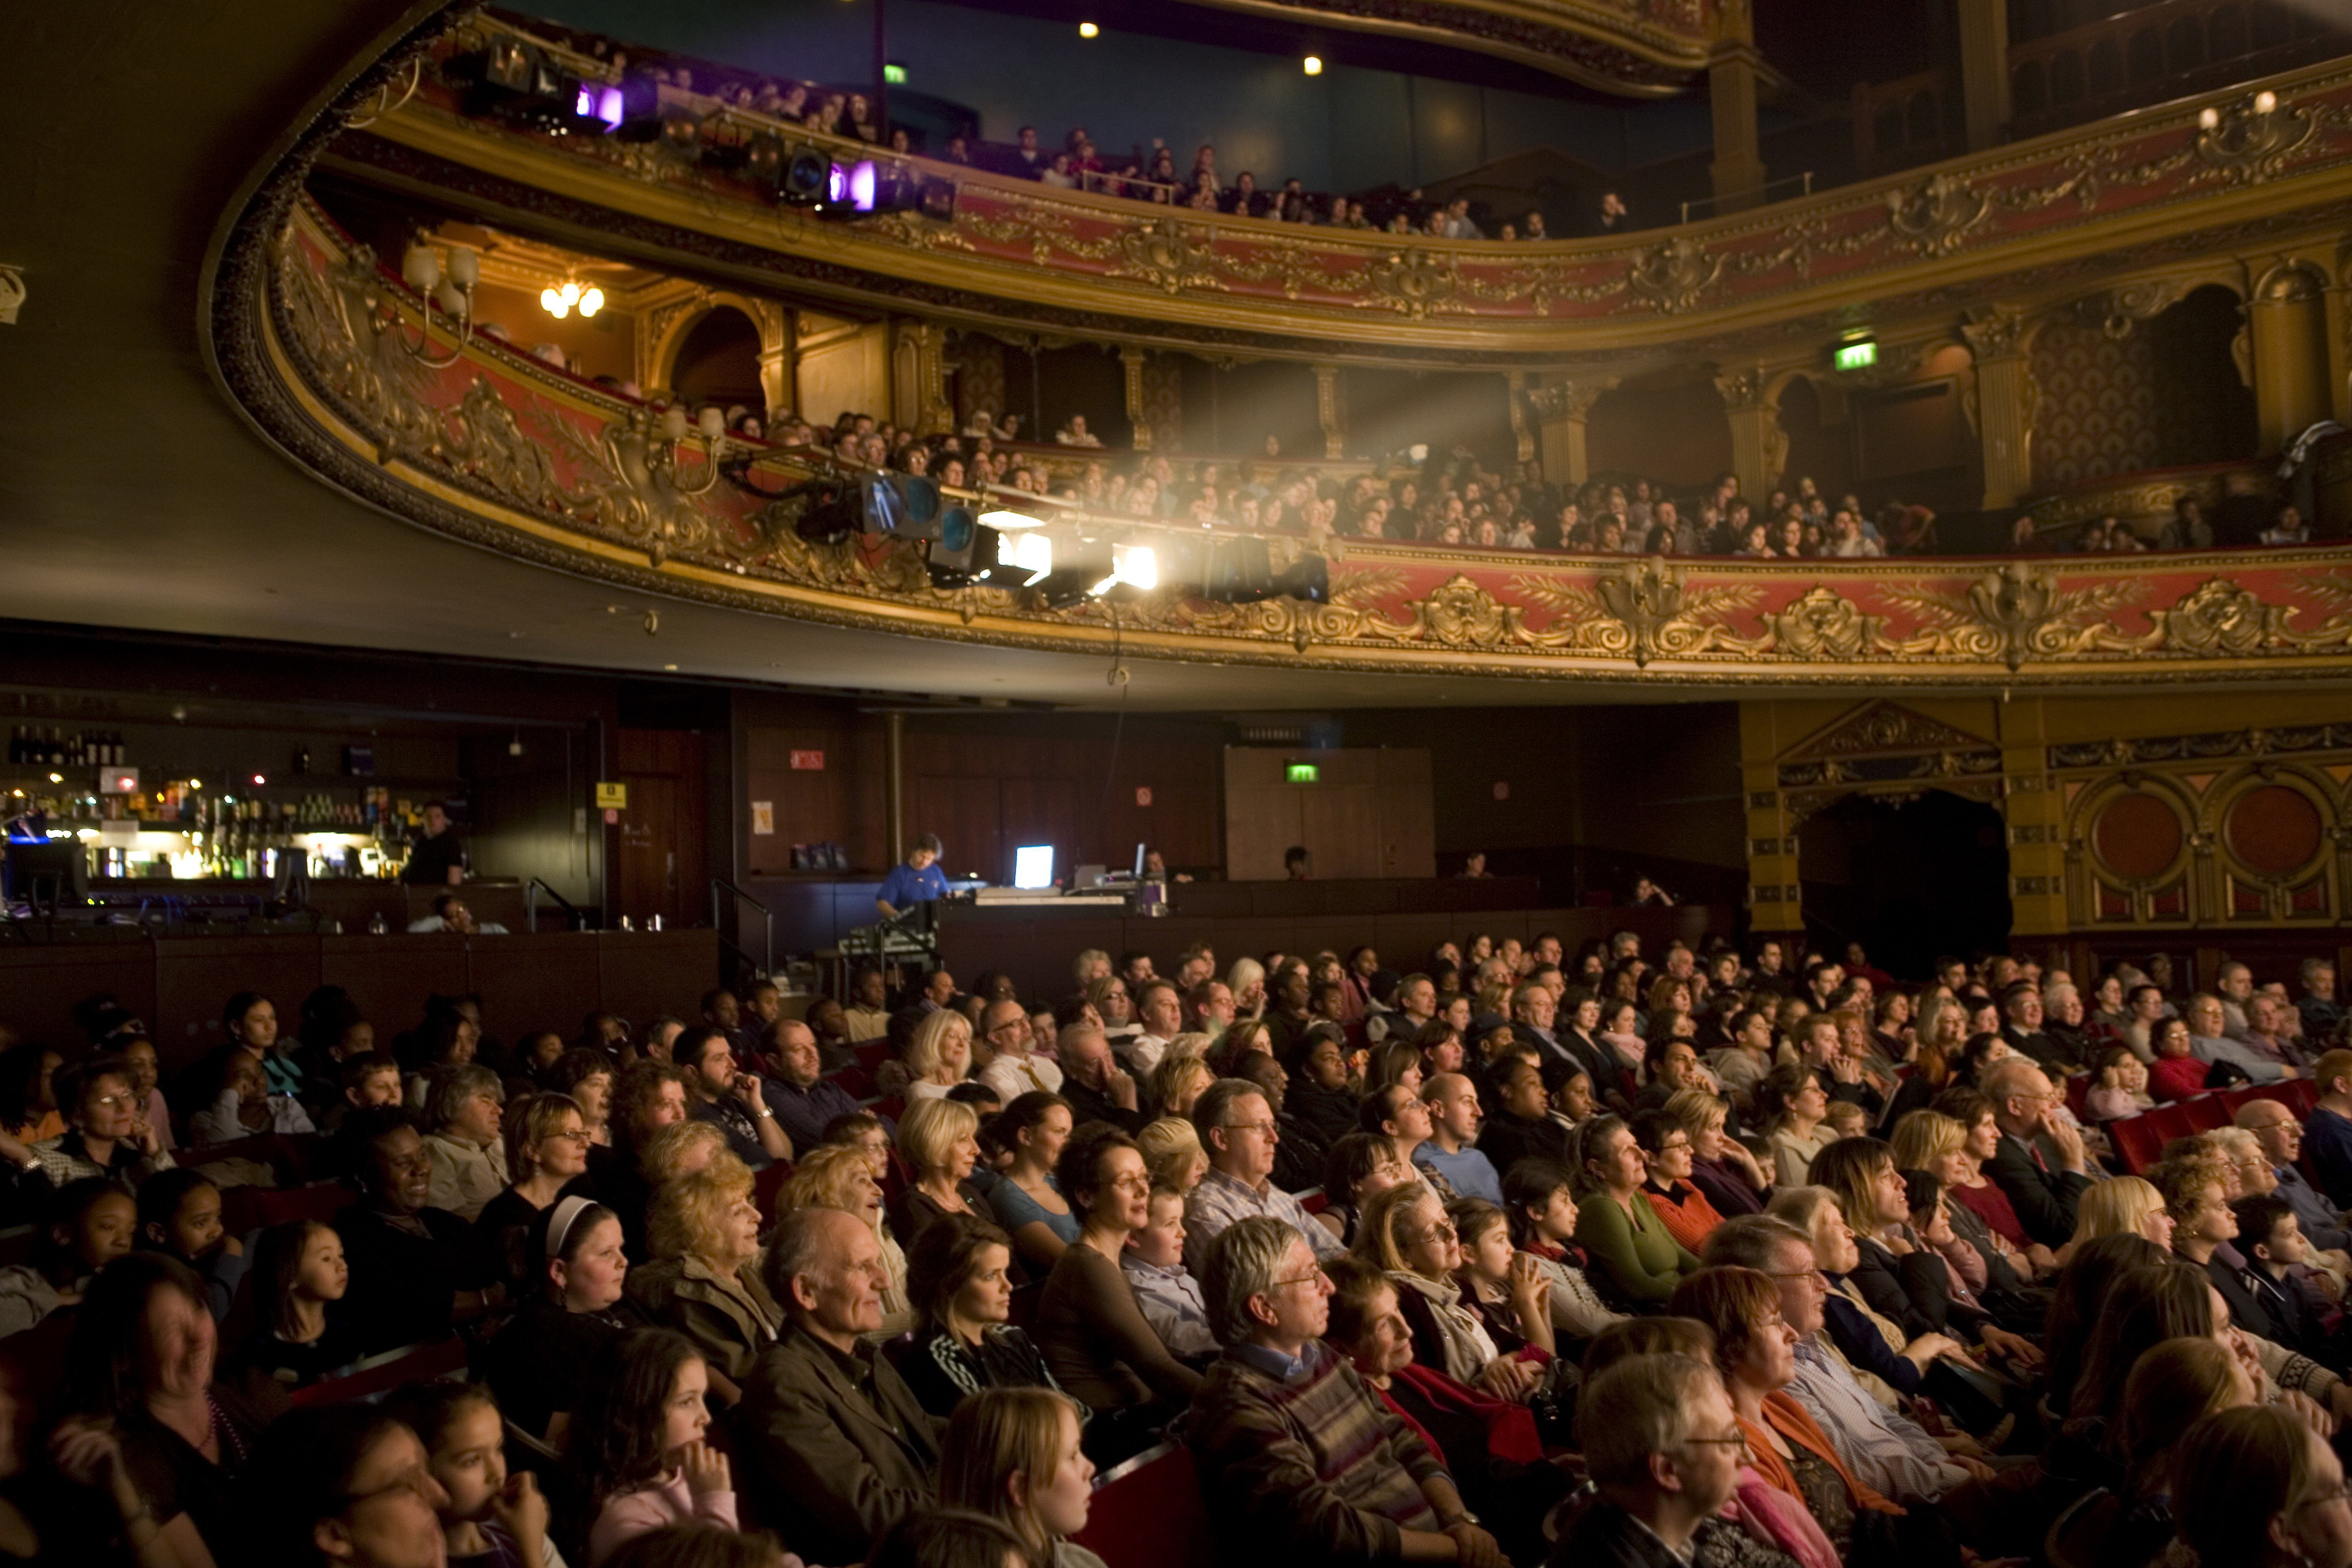 A captivated audience watches a performance at the Hackney Empire Theatre| Photo: Getty Images